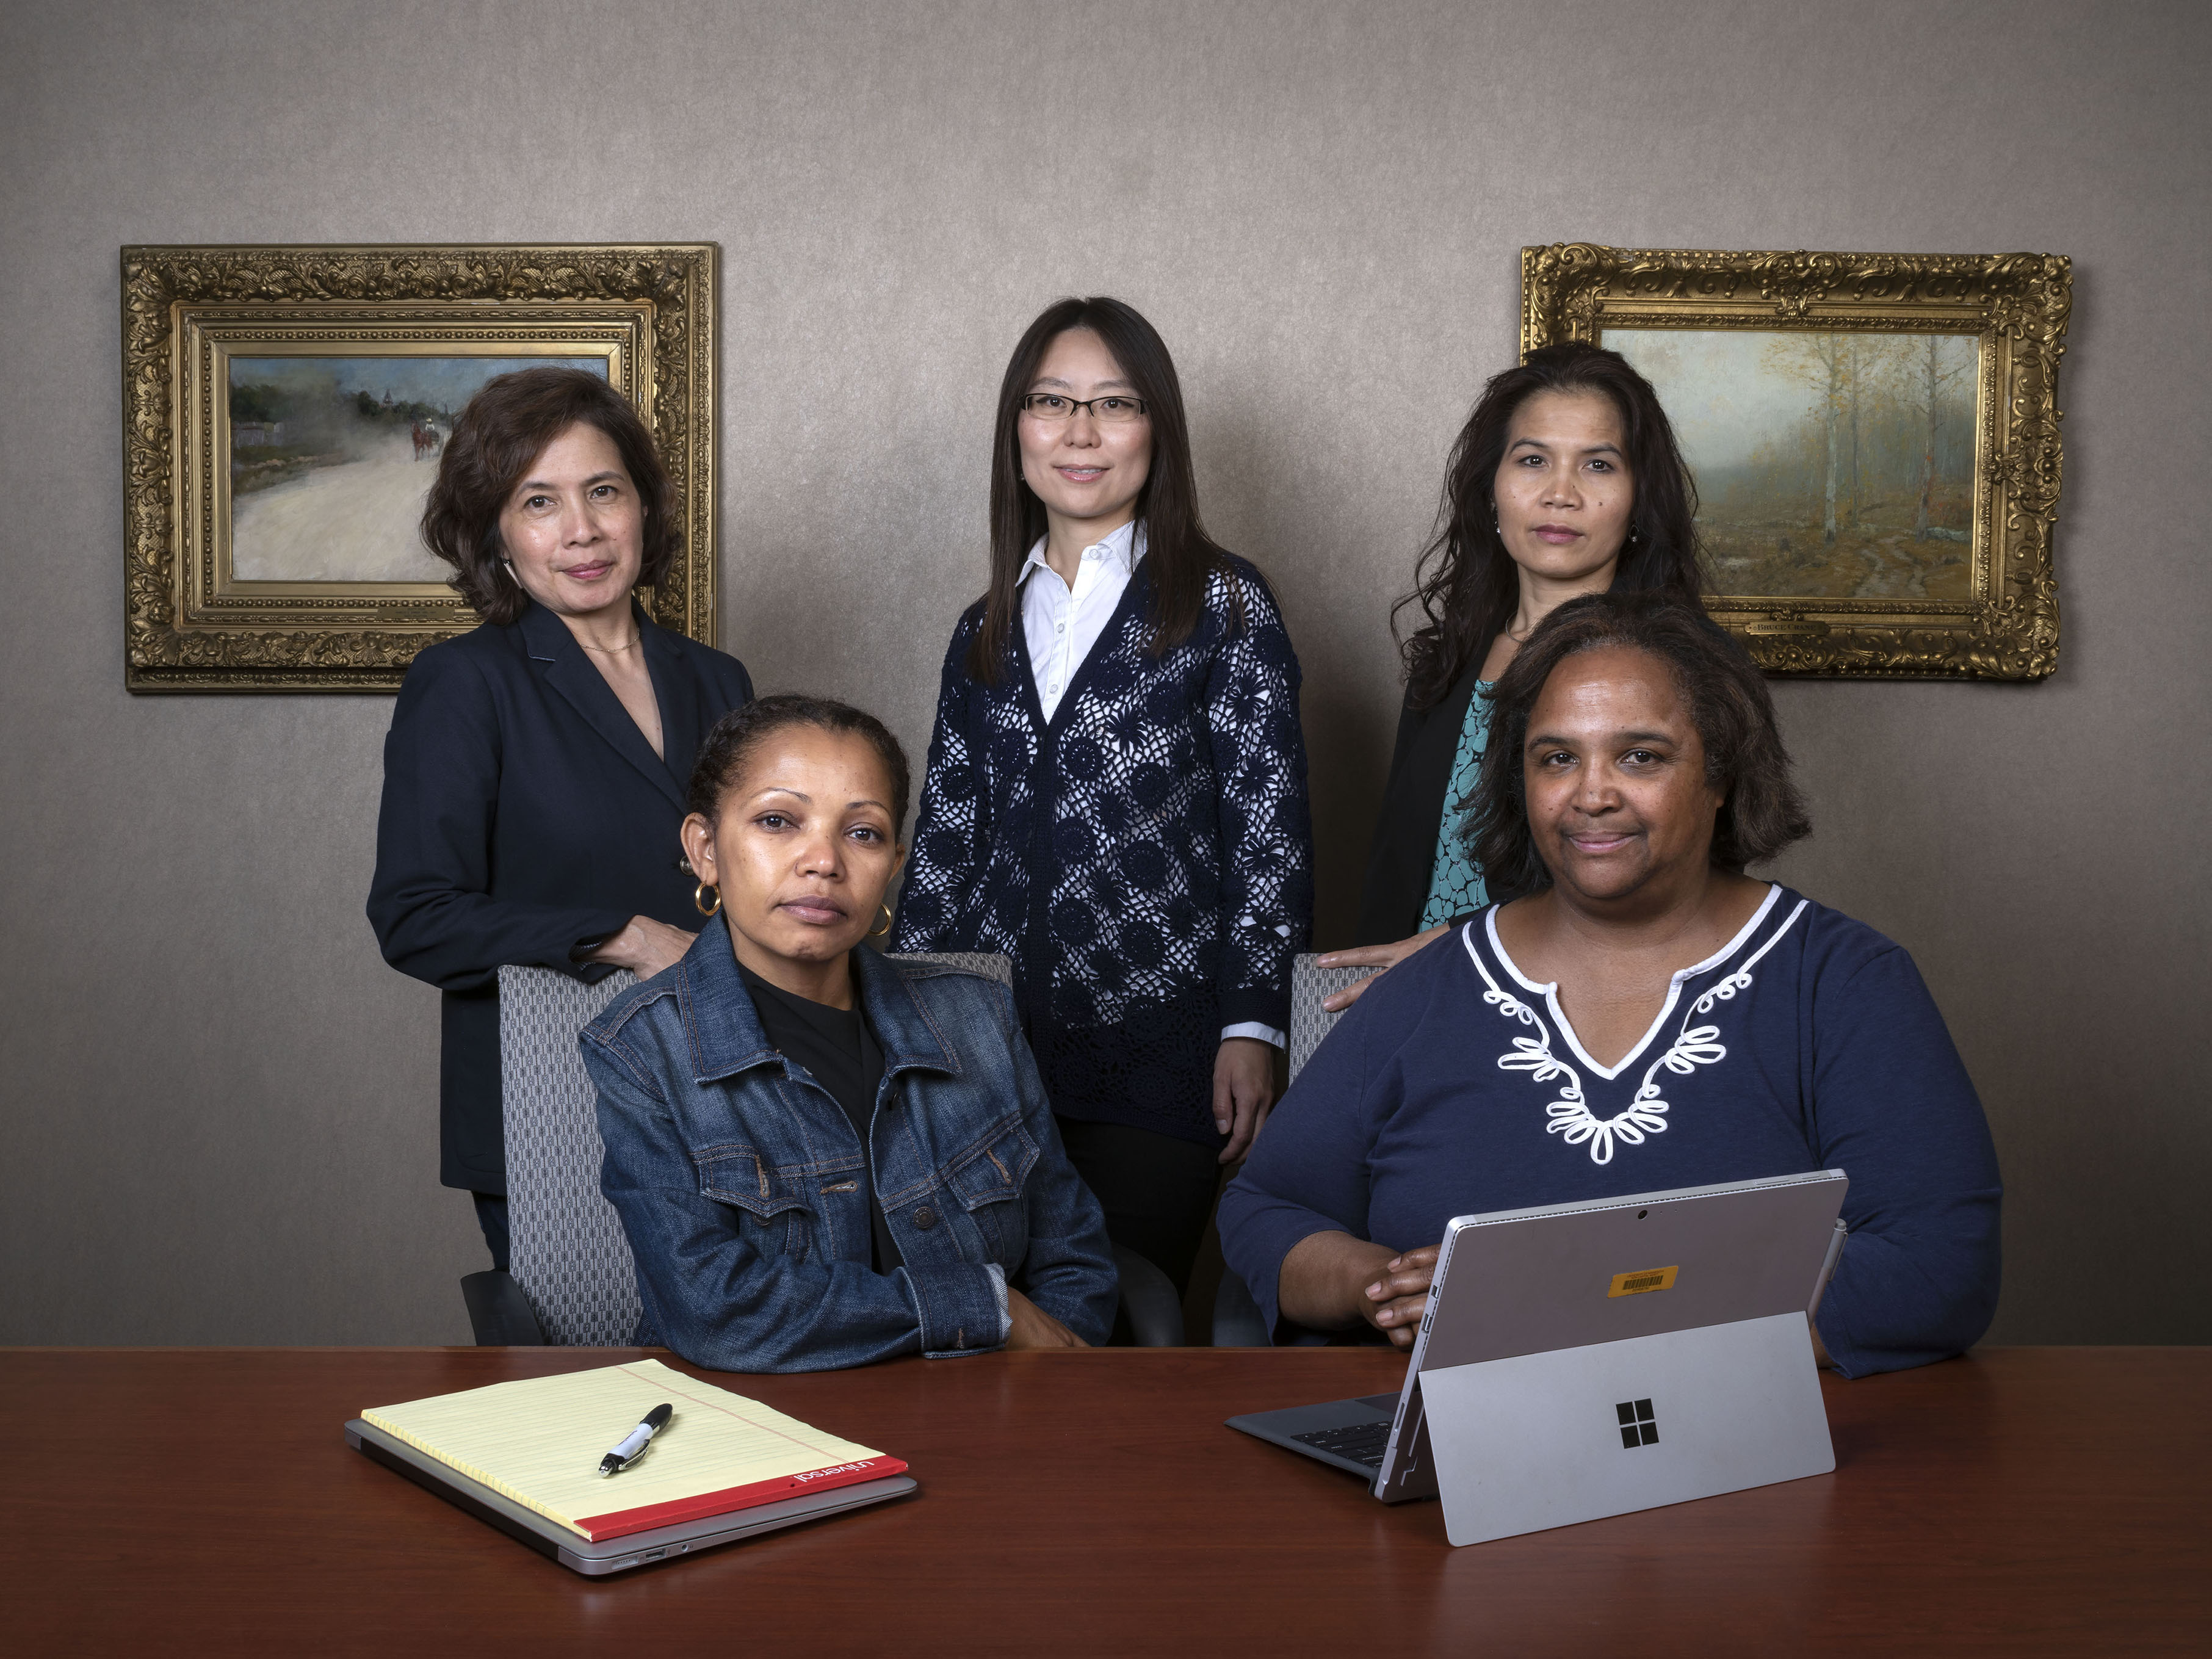 Five staff members gather in a board room facing the camera.